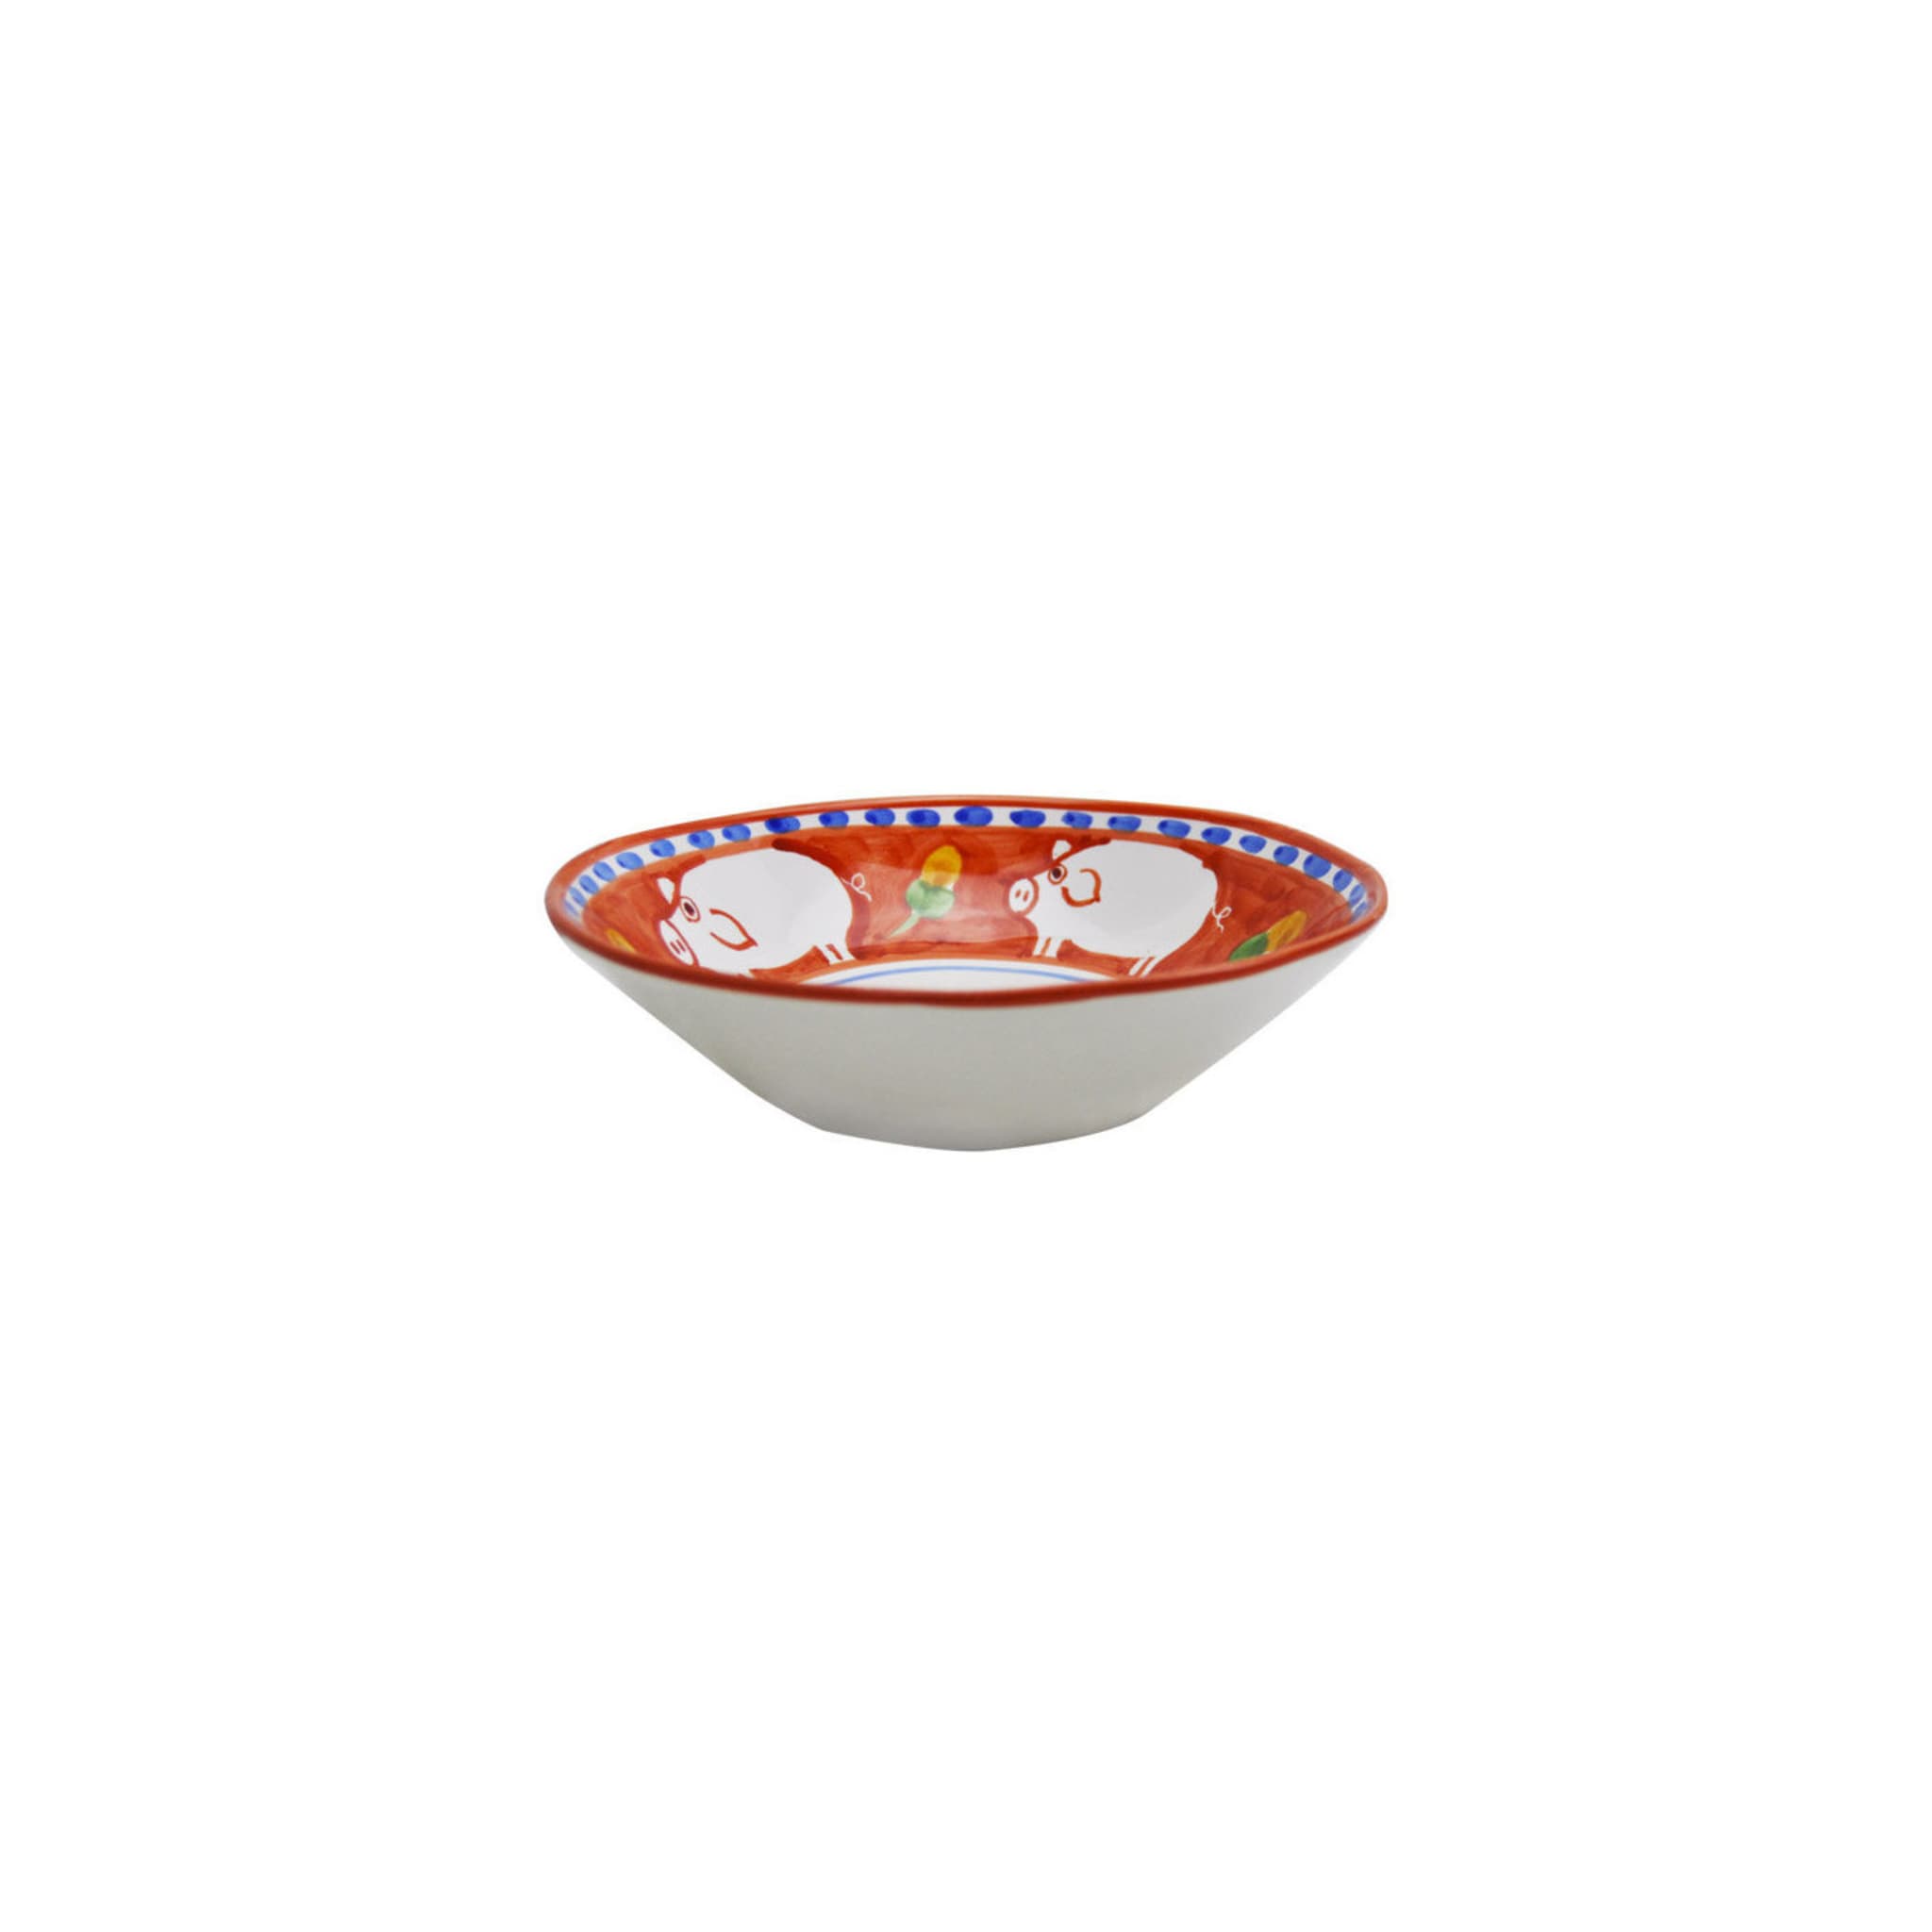 Cortile 18-Piece Red Plate Setting - Alternative view 3